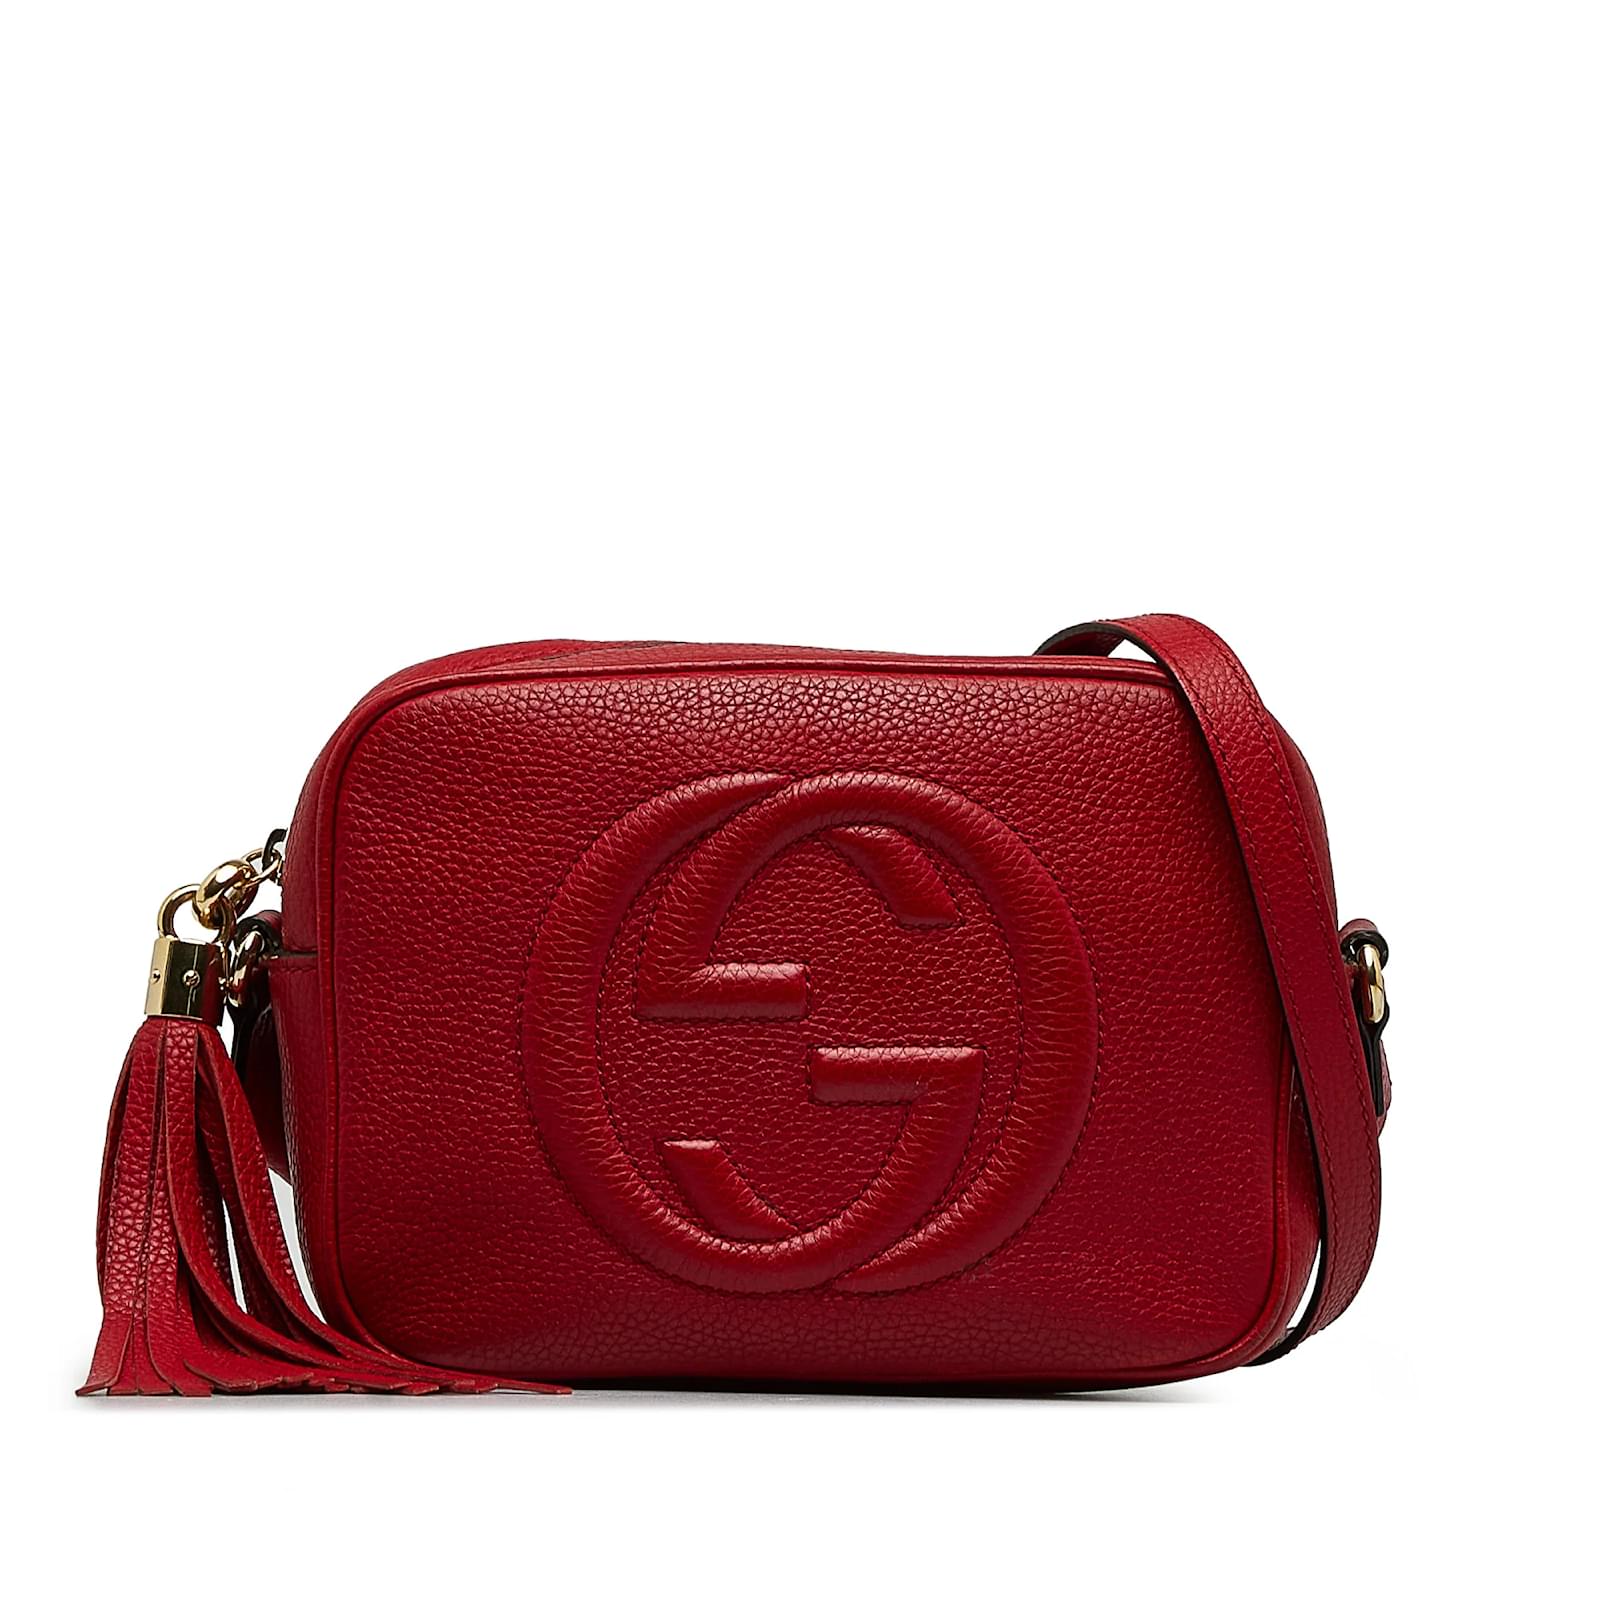 Gg marmont leather crossbody bag Gucci Red in Leather - 38598140